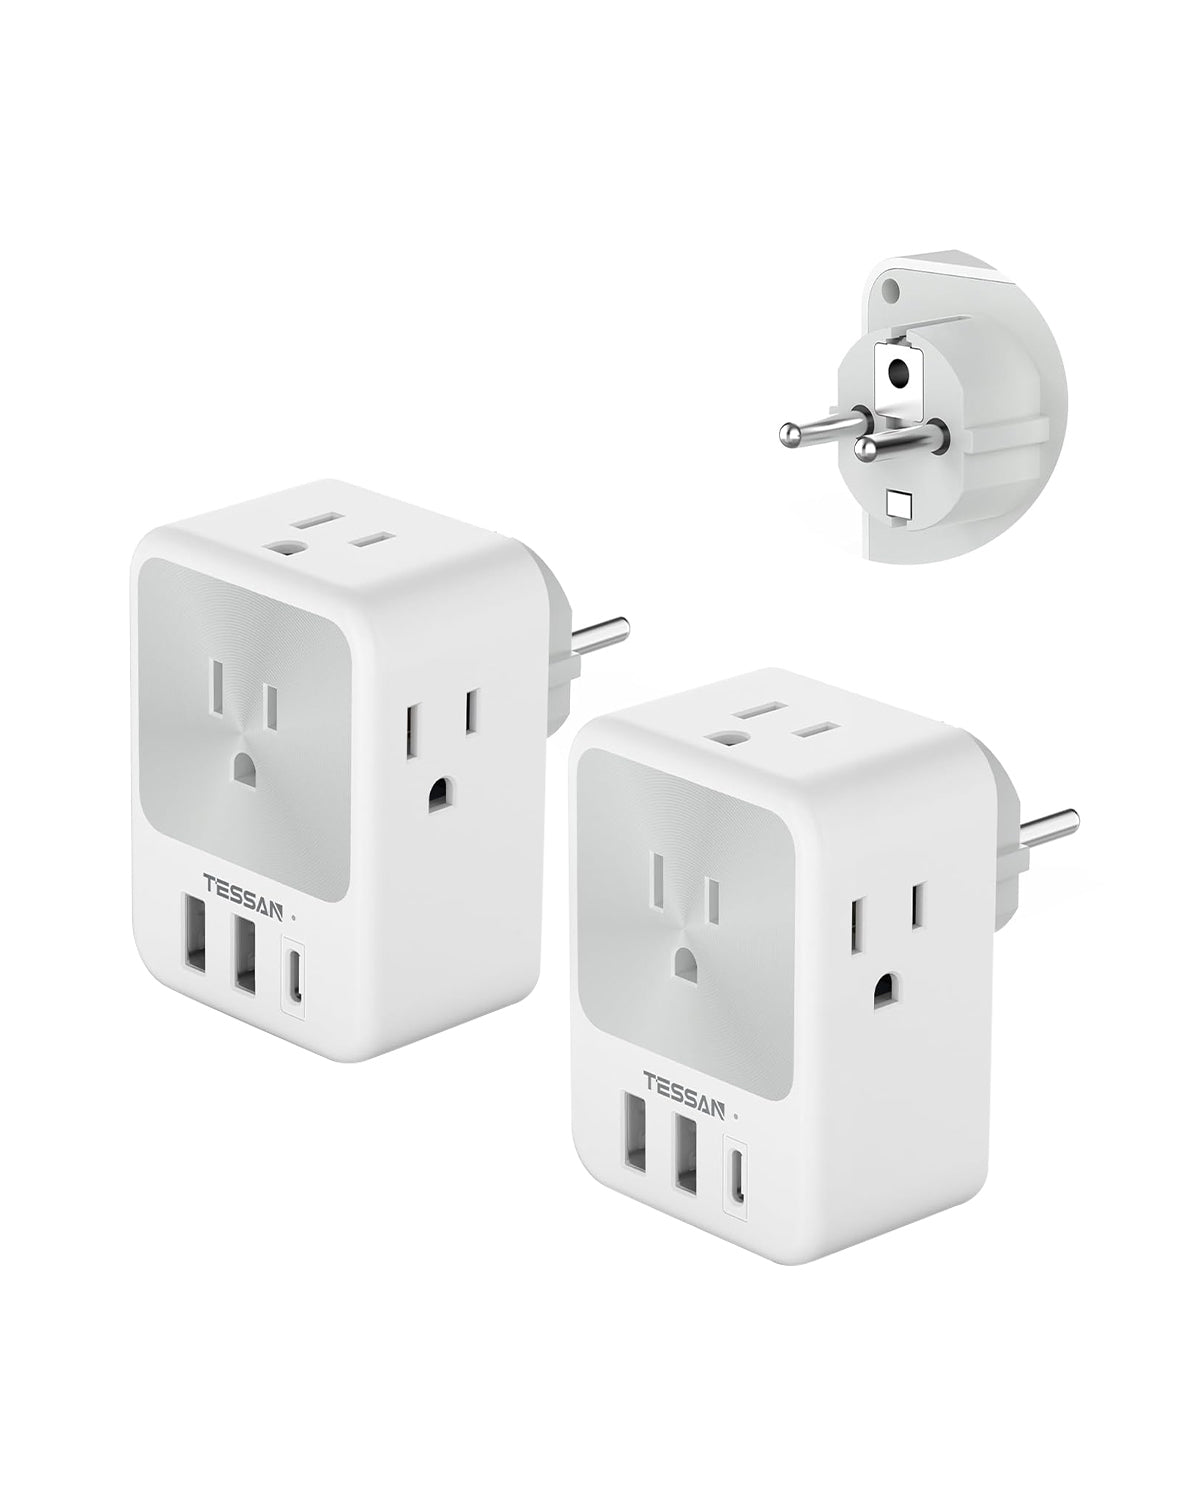 Germany France Travel Power Adapter, Schuko Adaptor with 4 Outlets 3 USB Ports (1 USB C)